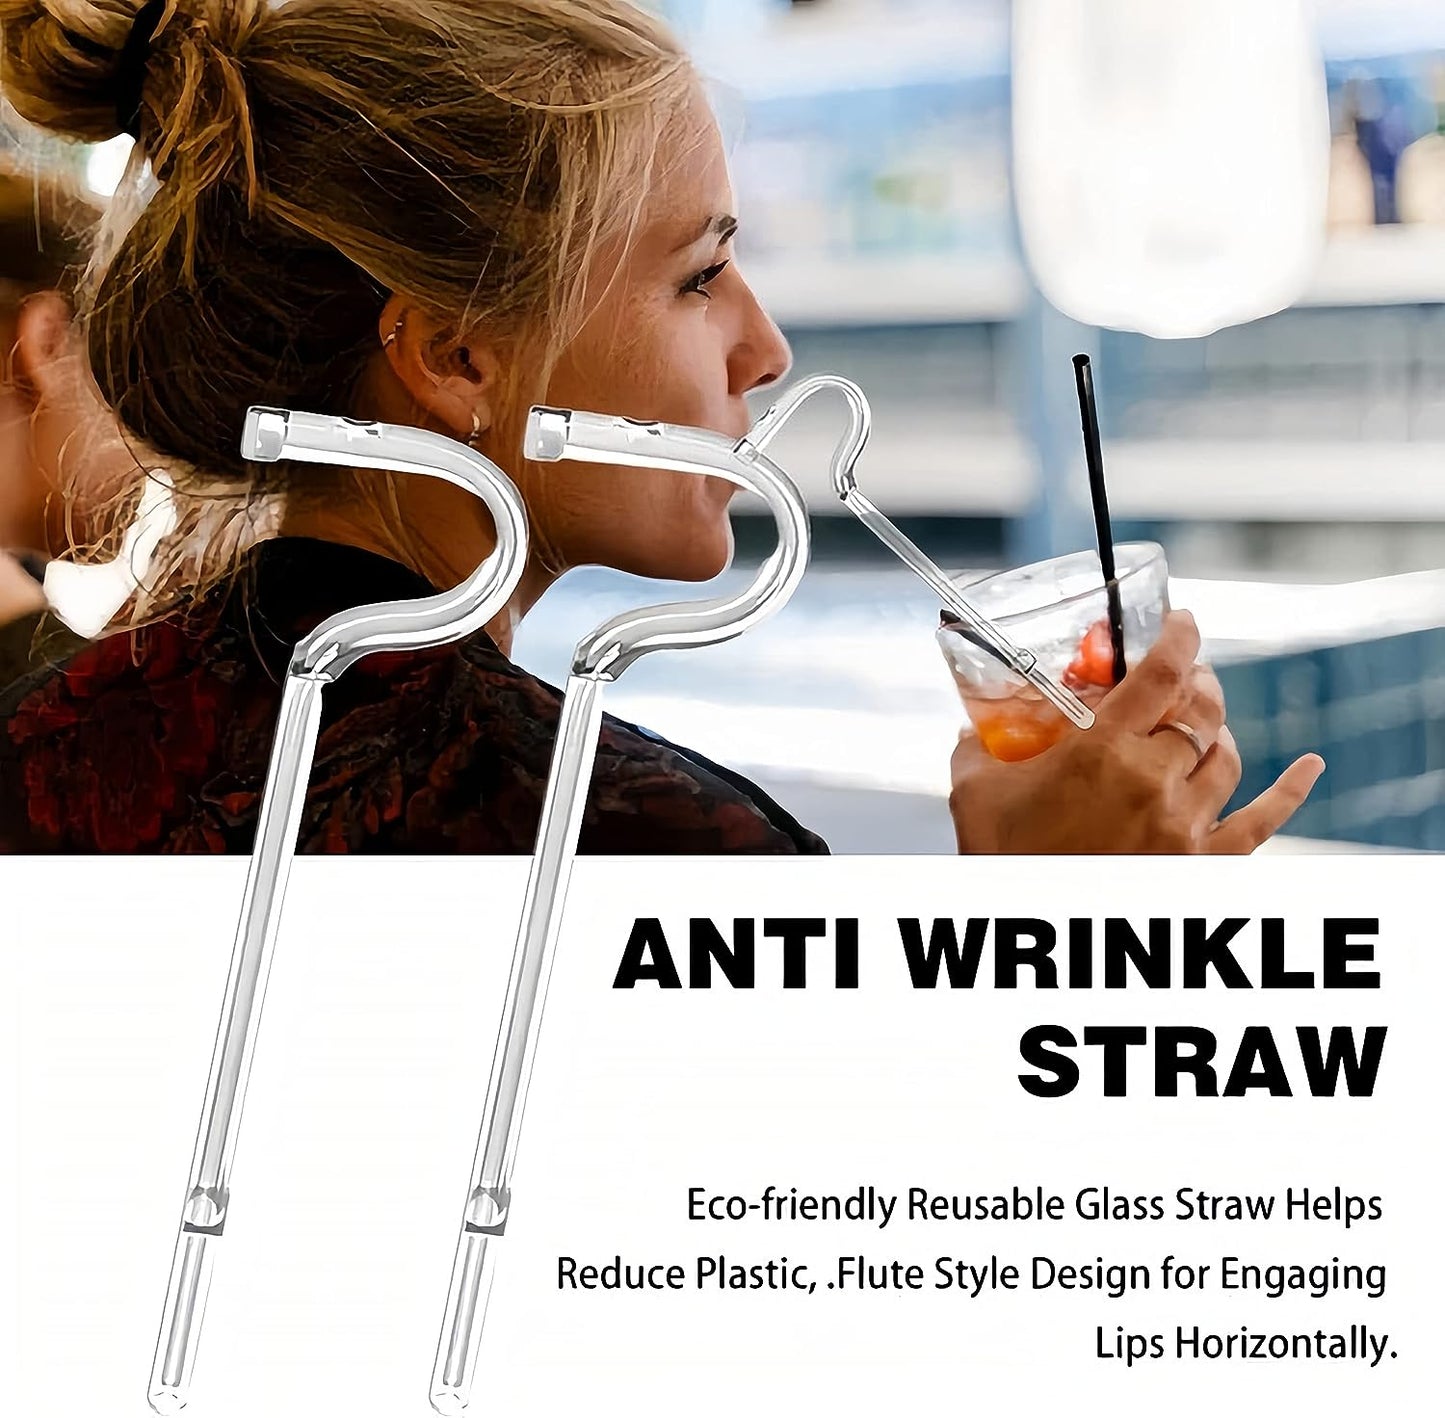 Wenoanew Anti Wrinkle Straw Flute Style Design for Engaging No Wrinkle Straw Say Goodbye to Wrinkles with Reusable Glass Drinking Lip Straw